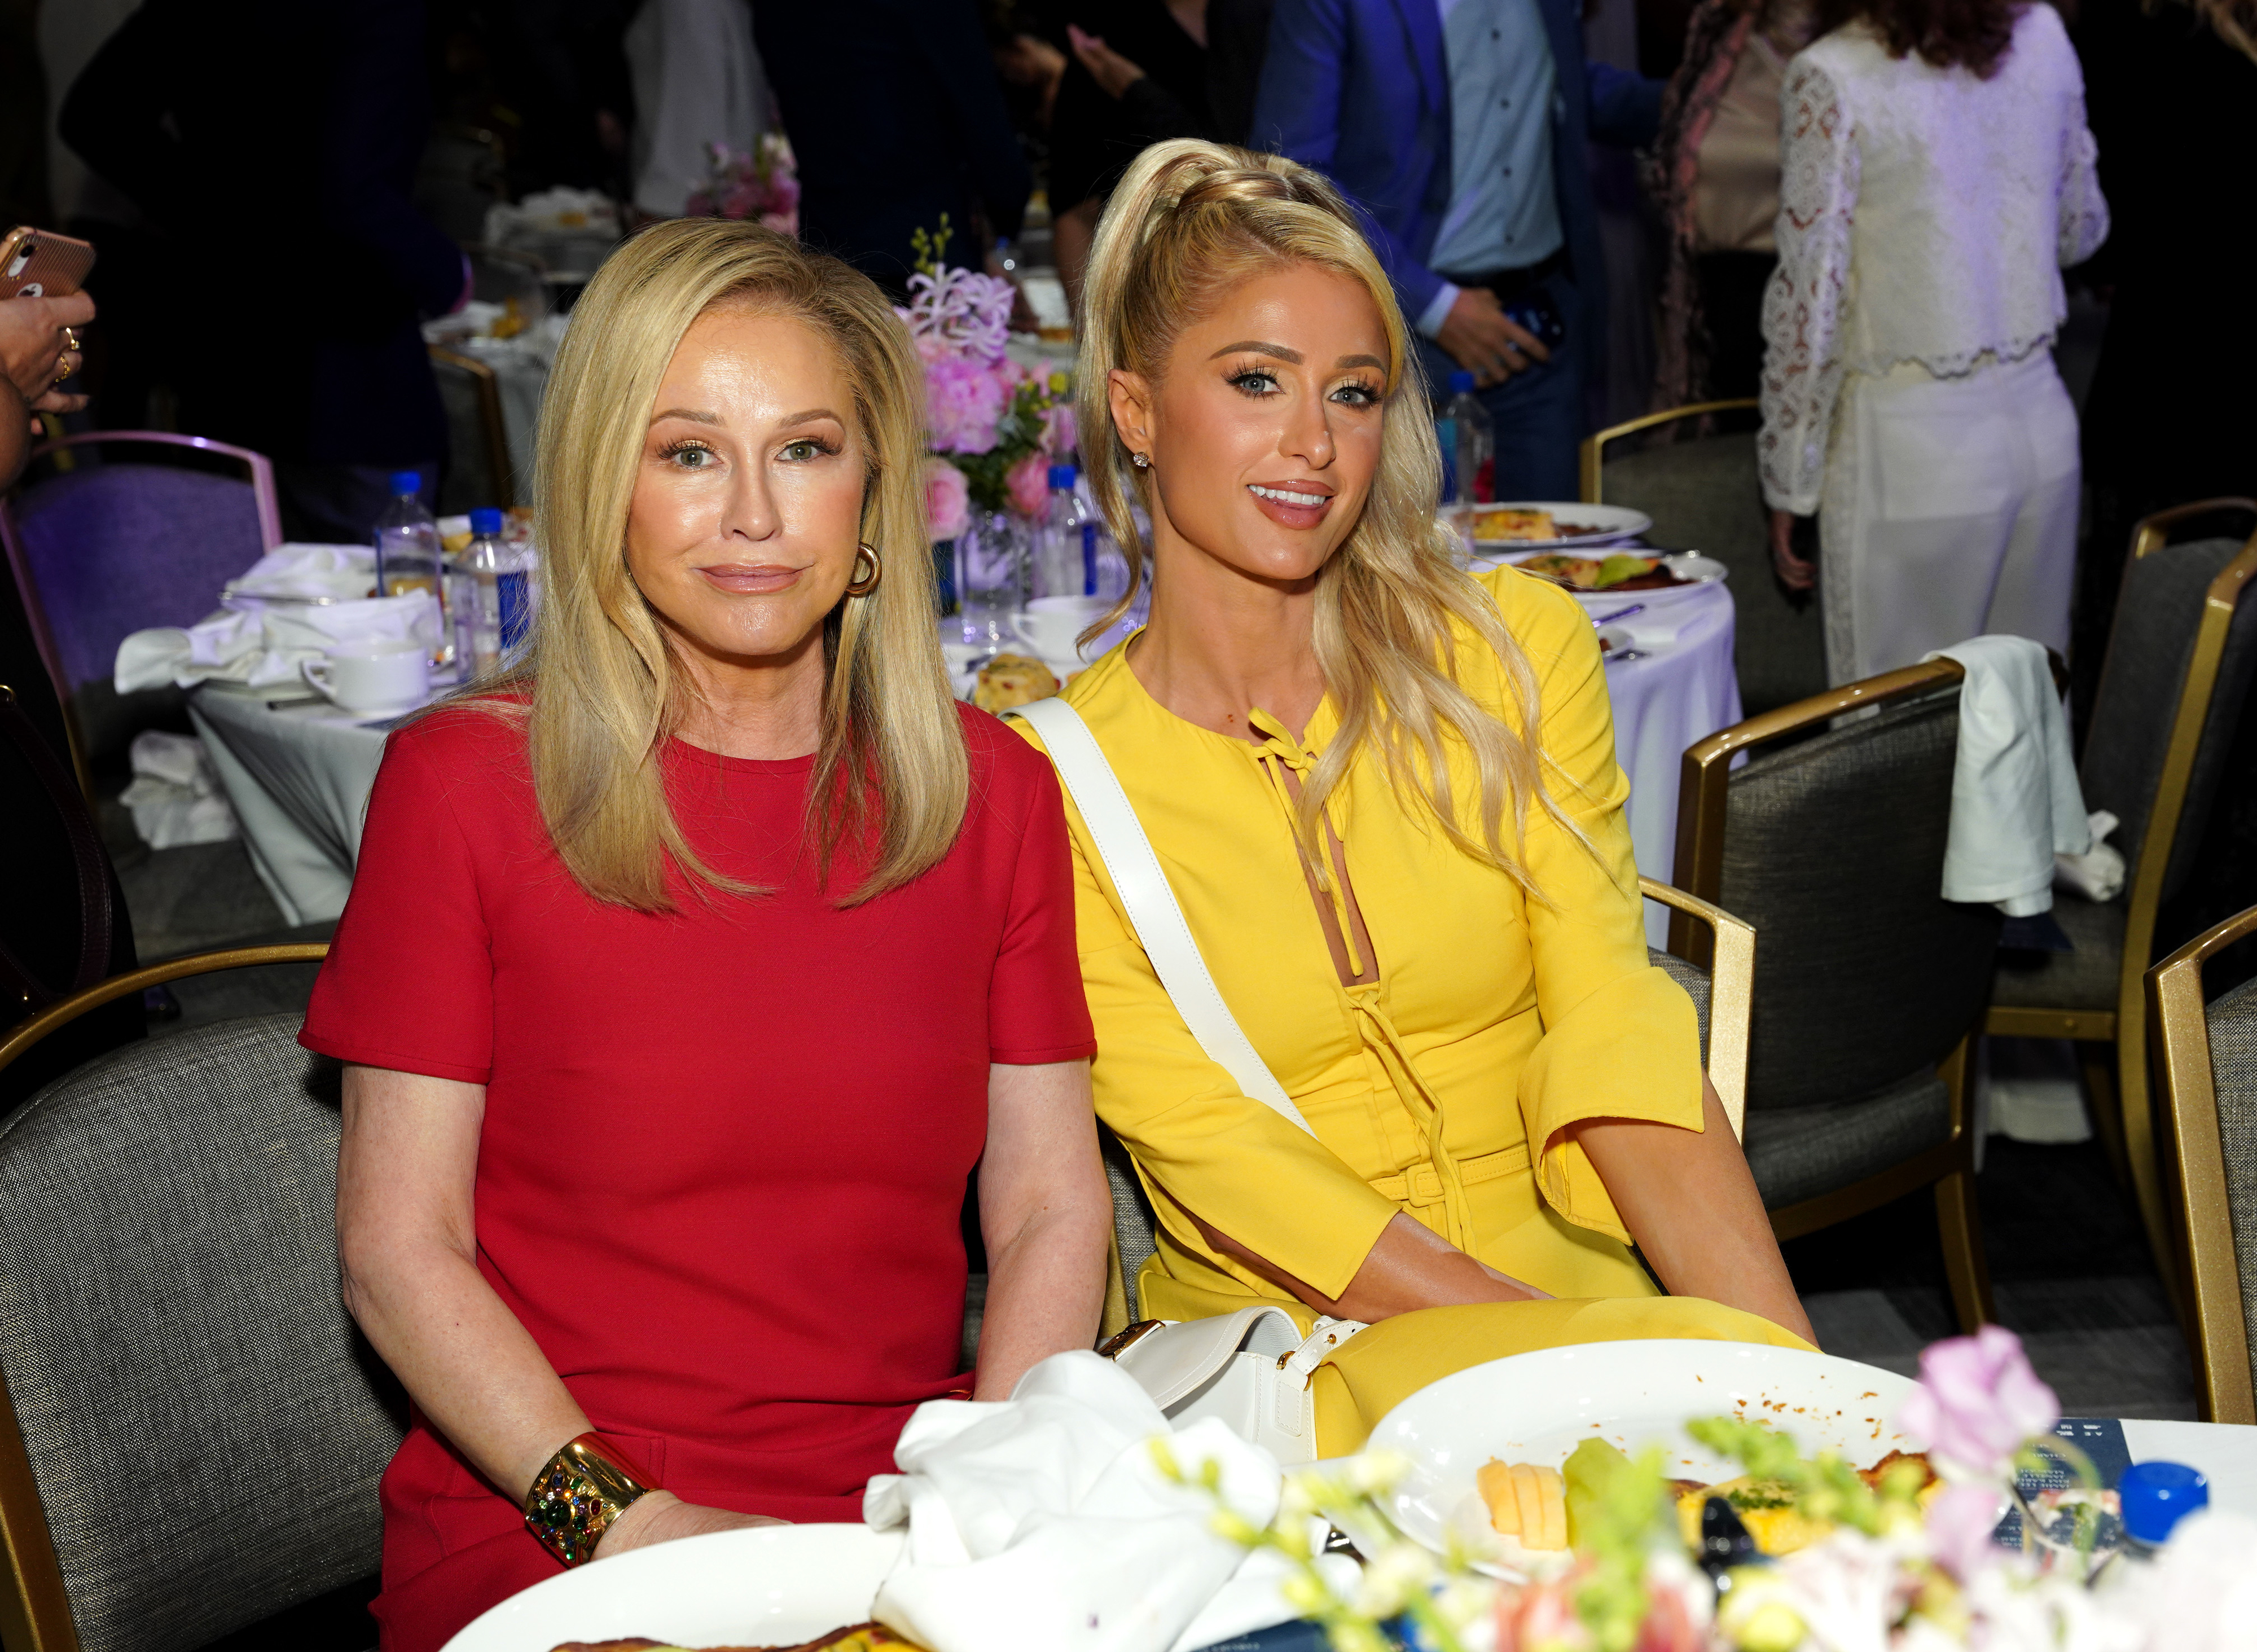 Kathy and Paris sitting at a dinner table at an event